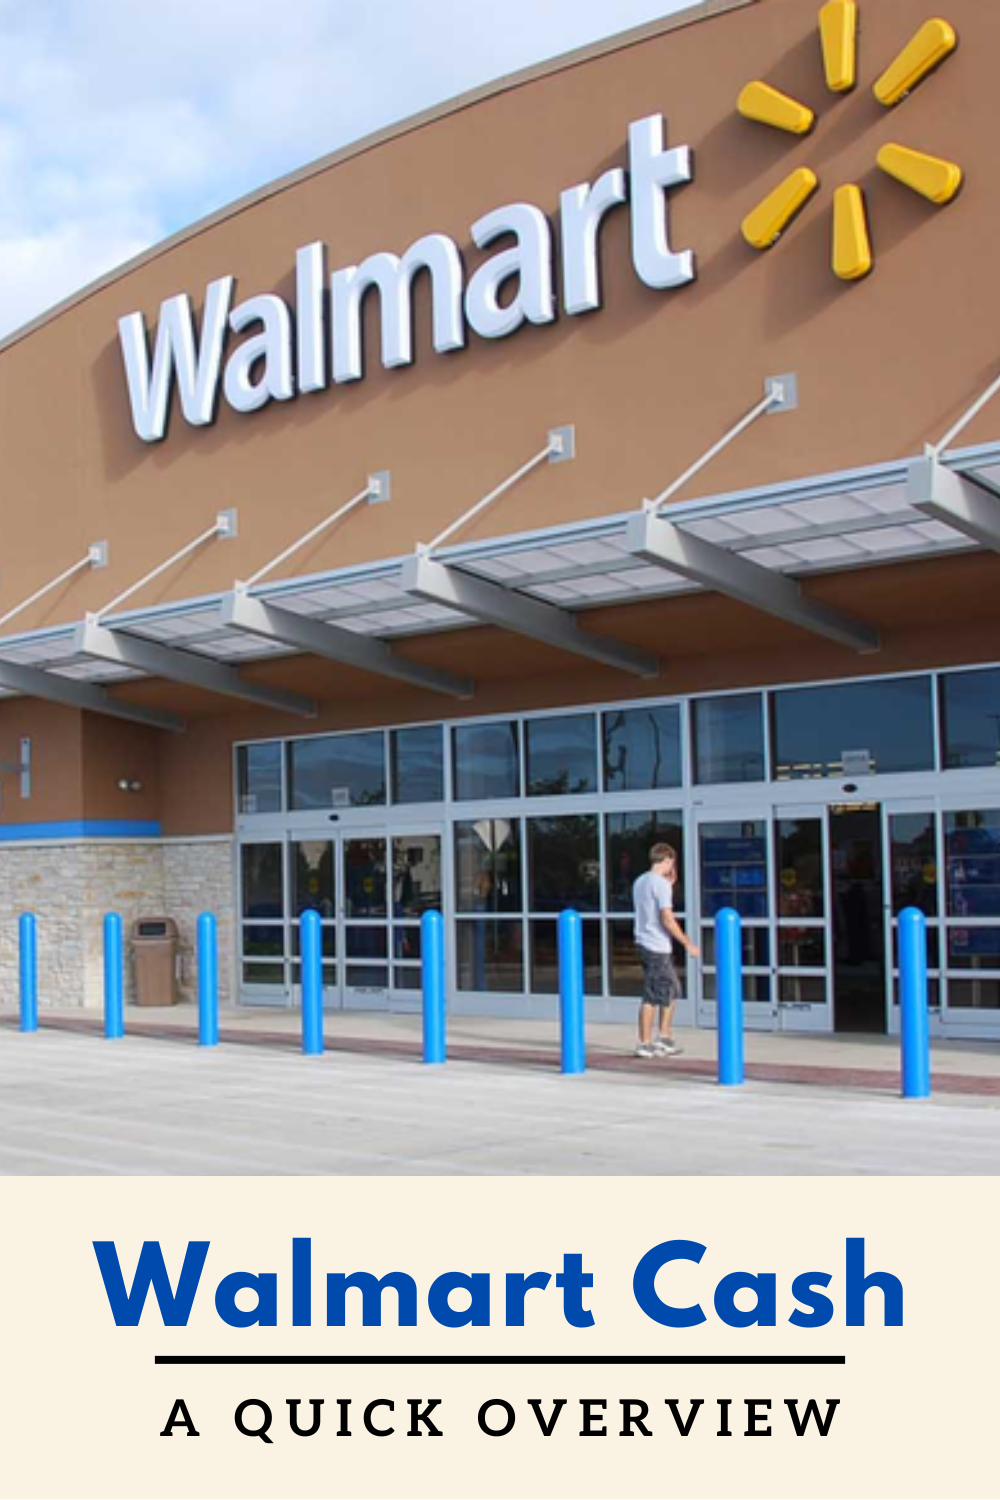 Walmart has been developing its Walmart Cash program. Now that it is growing in popularity, let me give you a quick overview of how the program works.